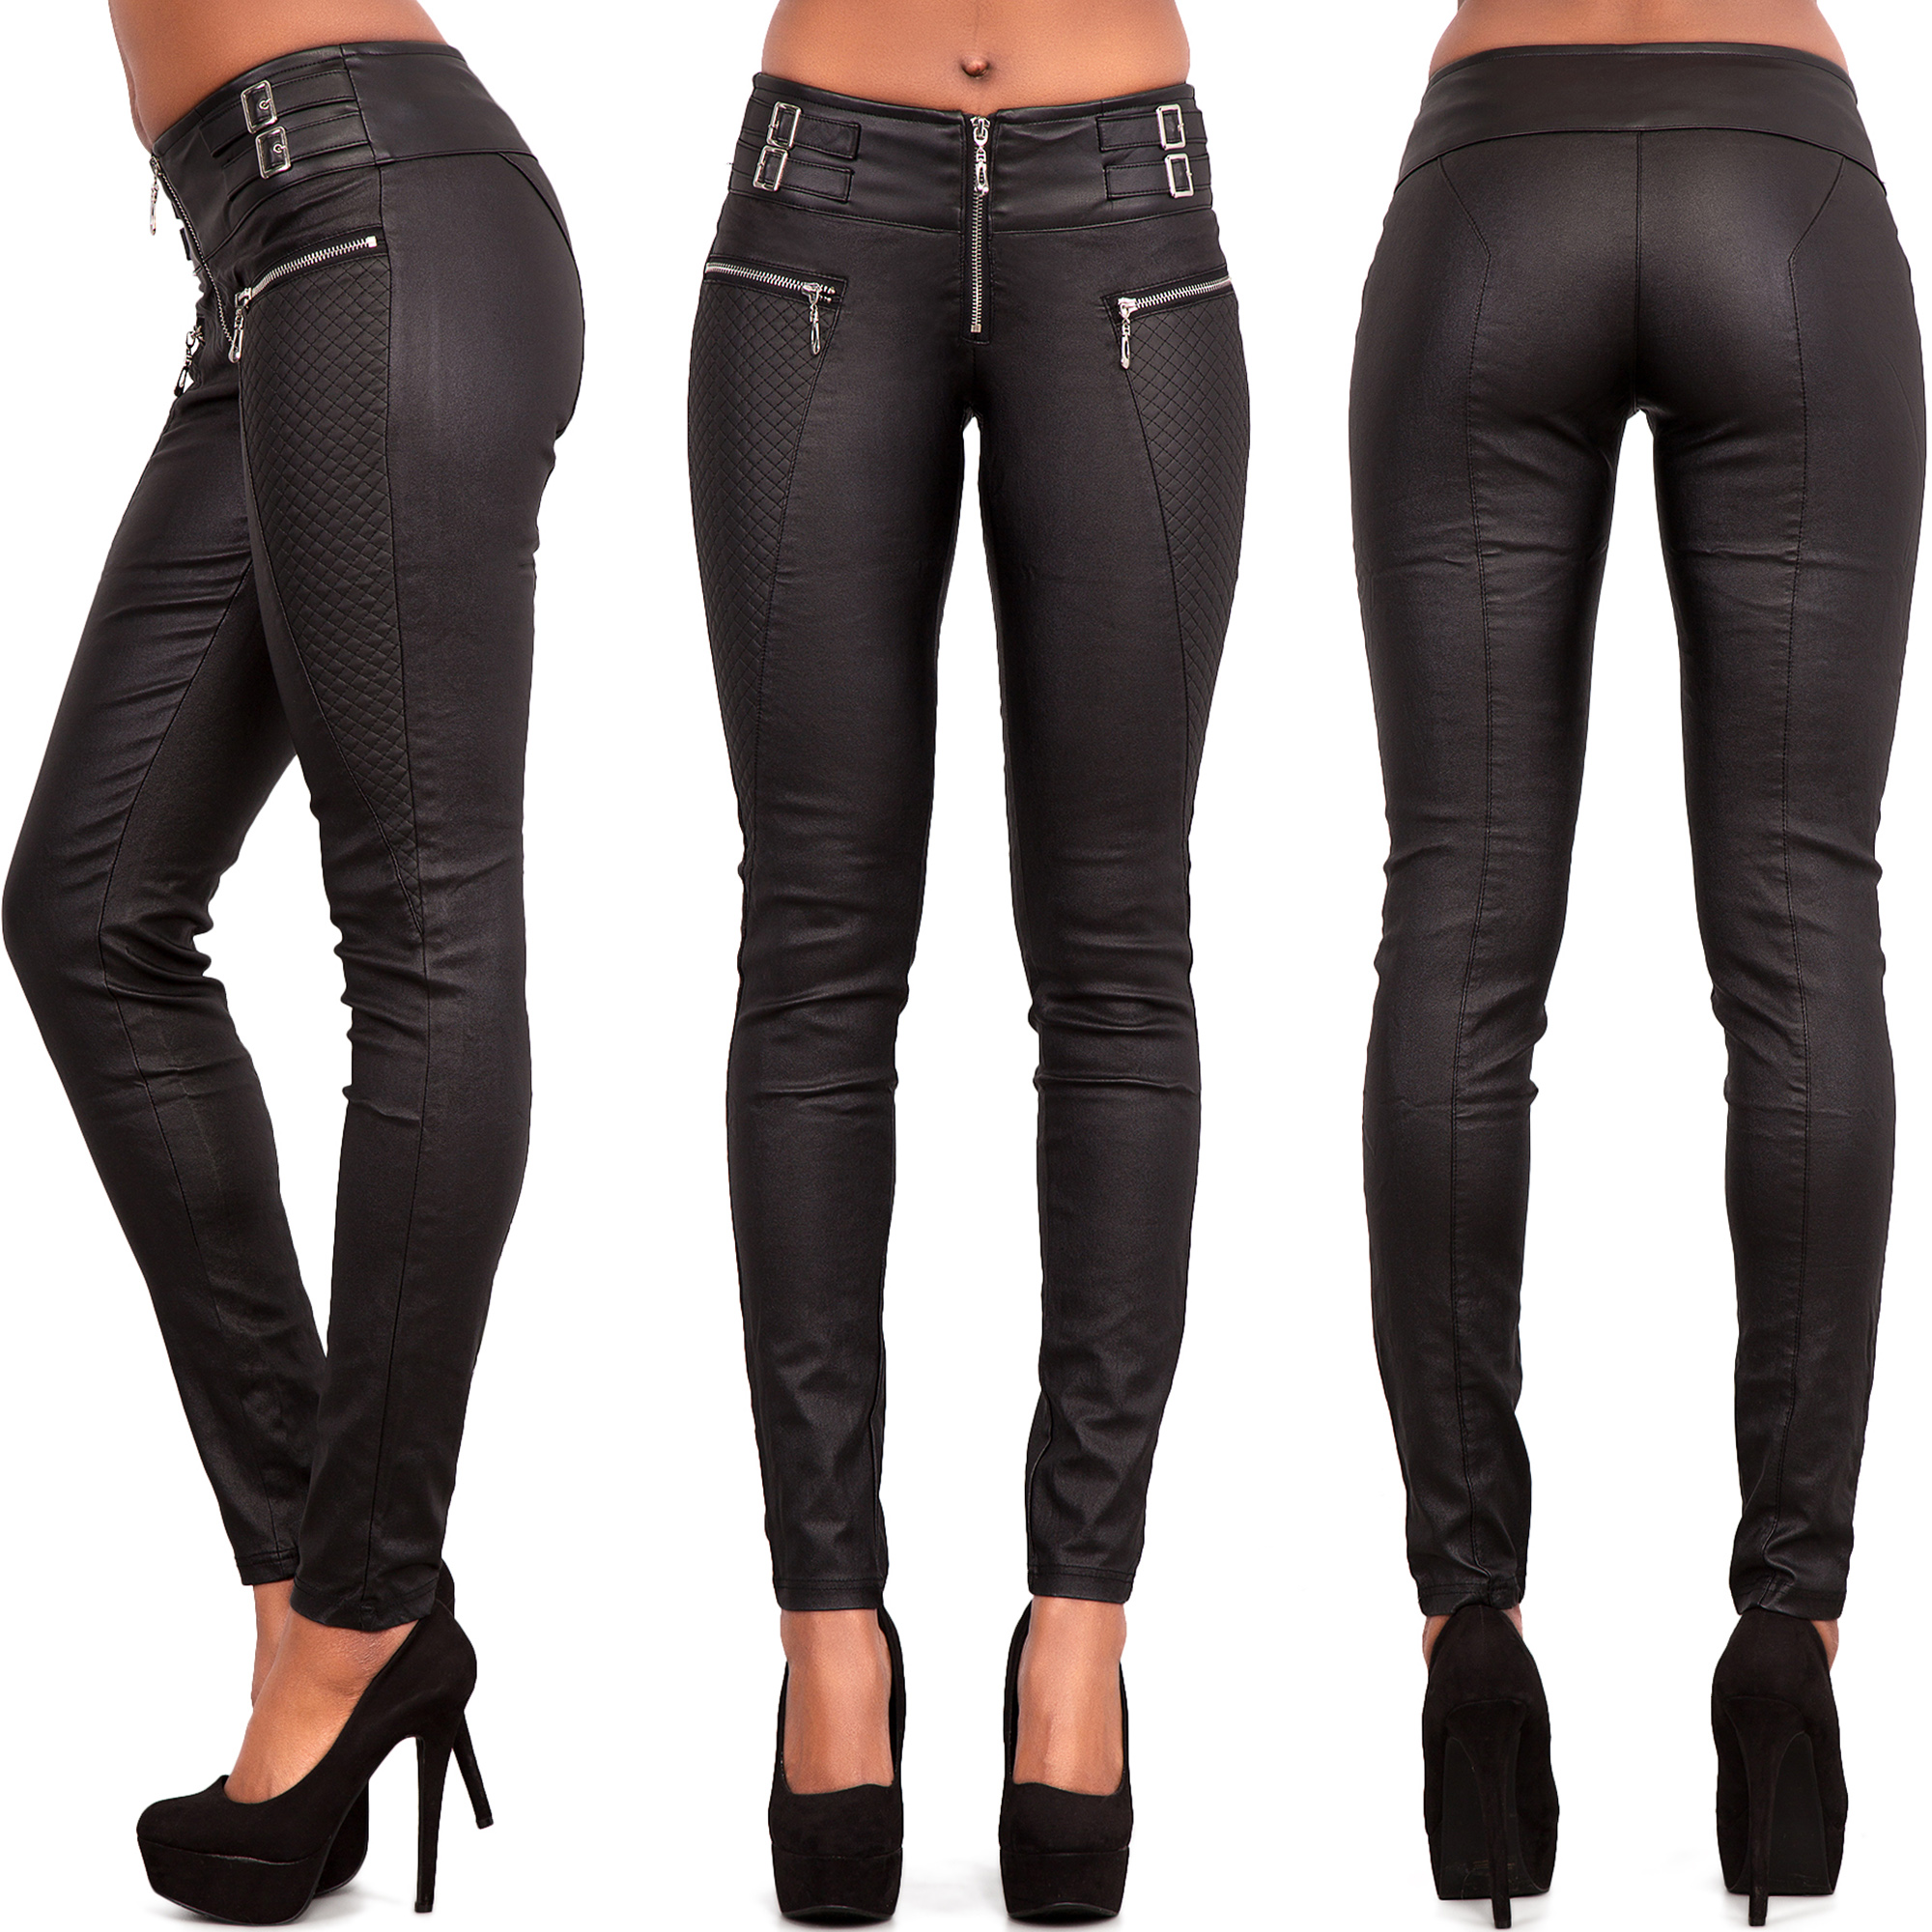 Women's Low Rise Leather Skinny Jeans Slim Trousers Perfect Fit Size 6-14  HOT